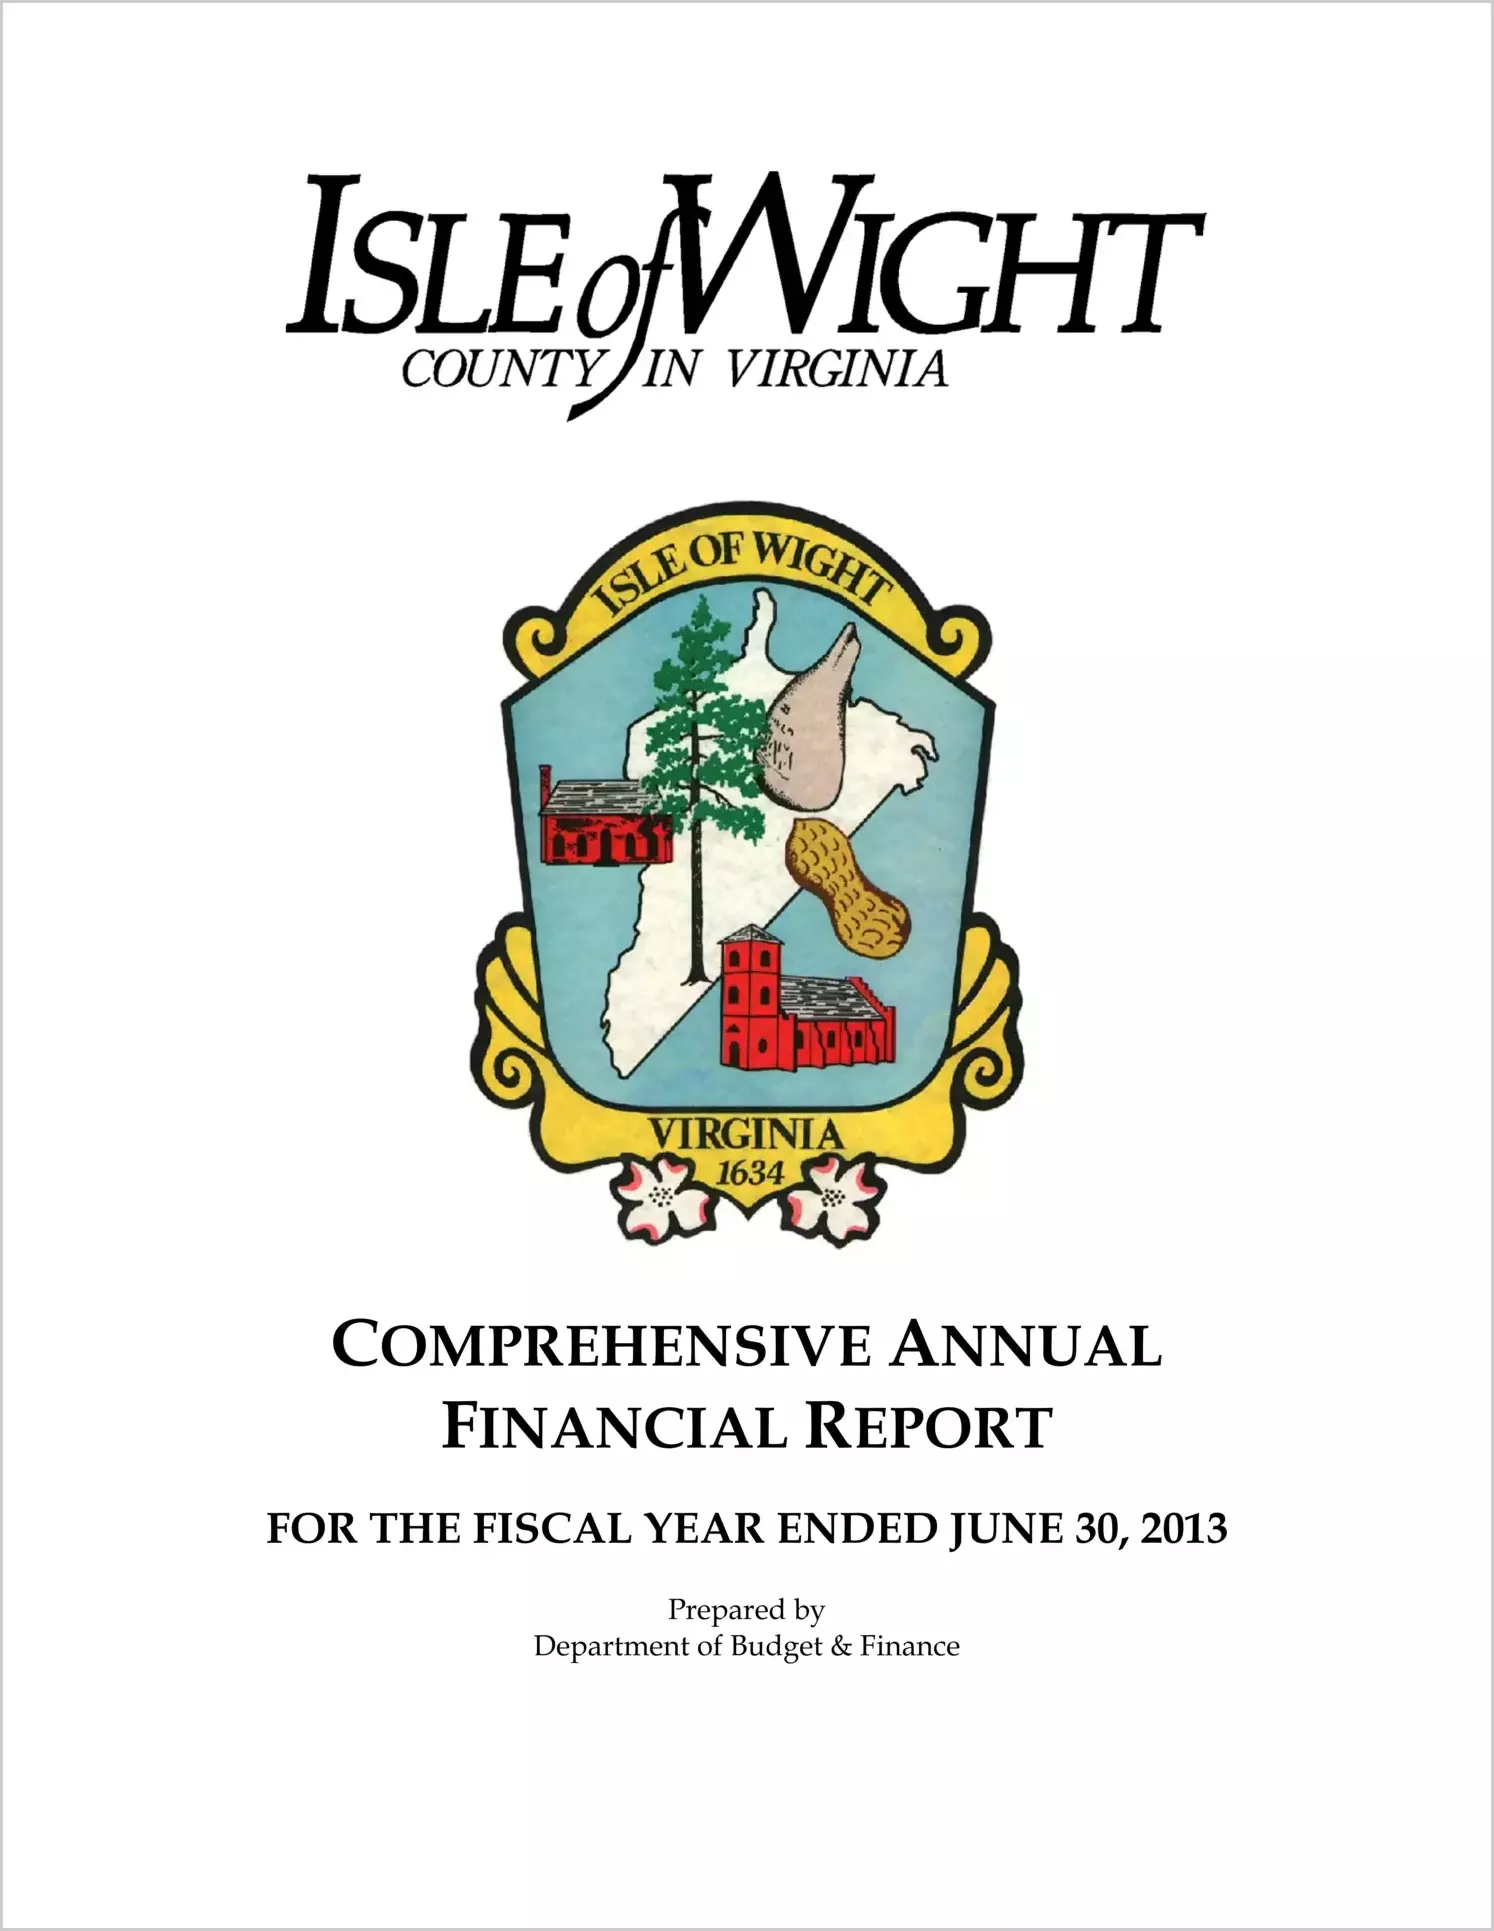 2013 Annual Financial Report for County of Isle of Wight